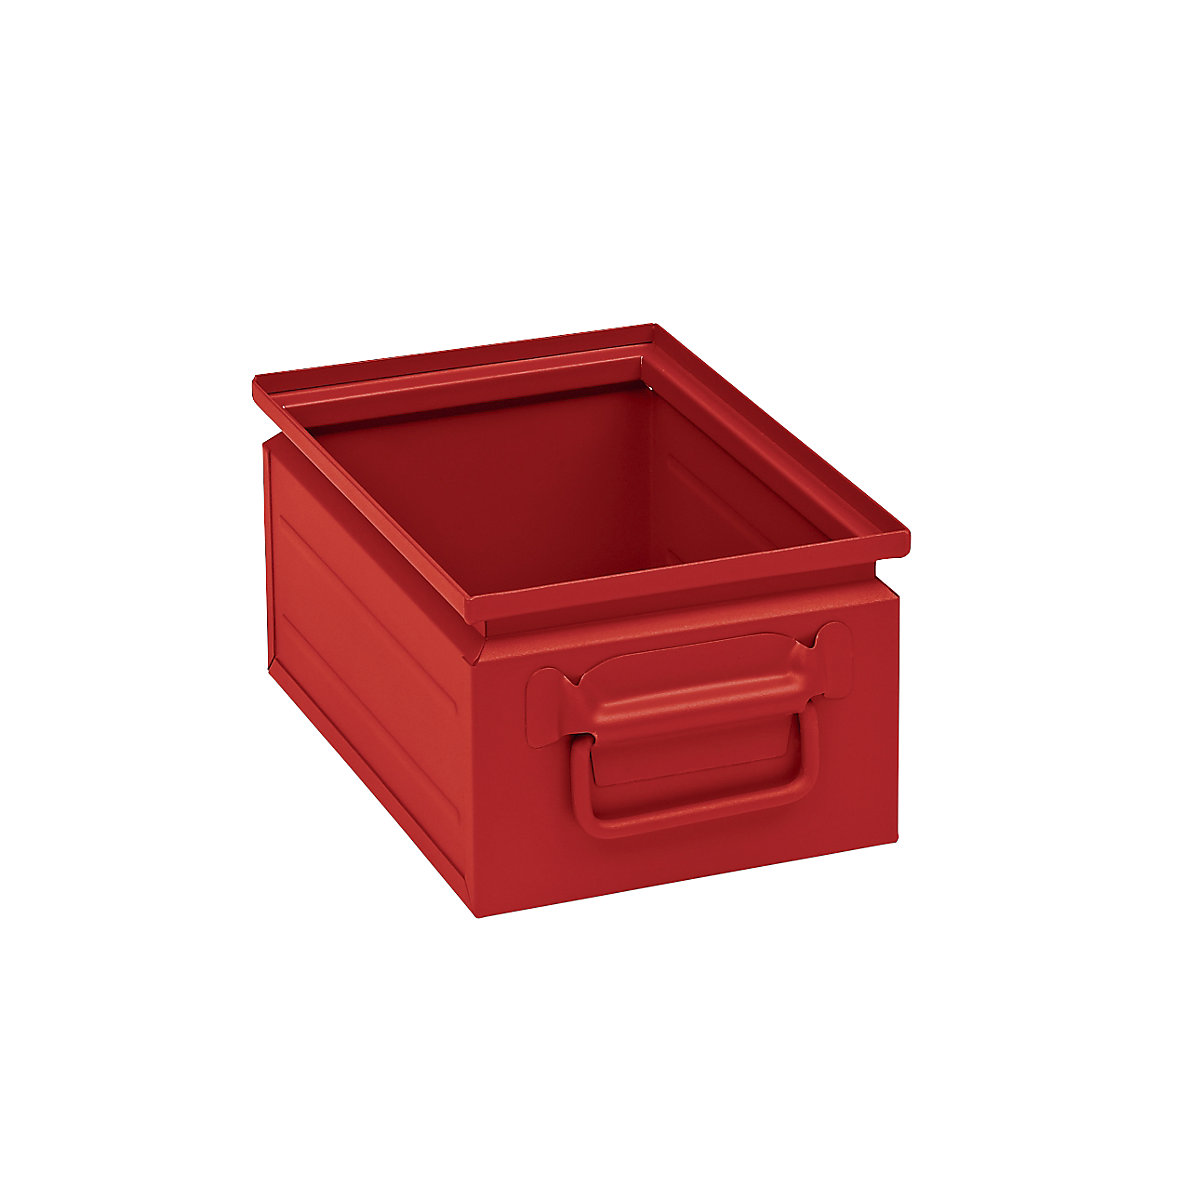 Stacking container made of sheet steel, capacity approx. 9 l, flame red RAL 3000